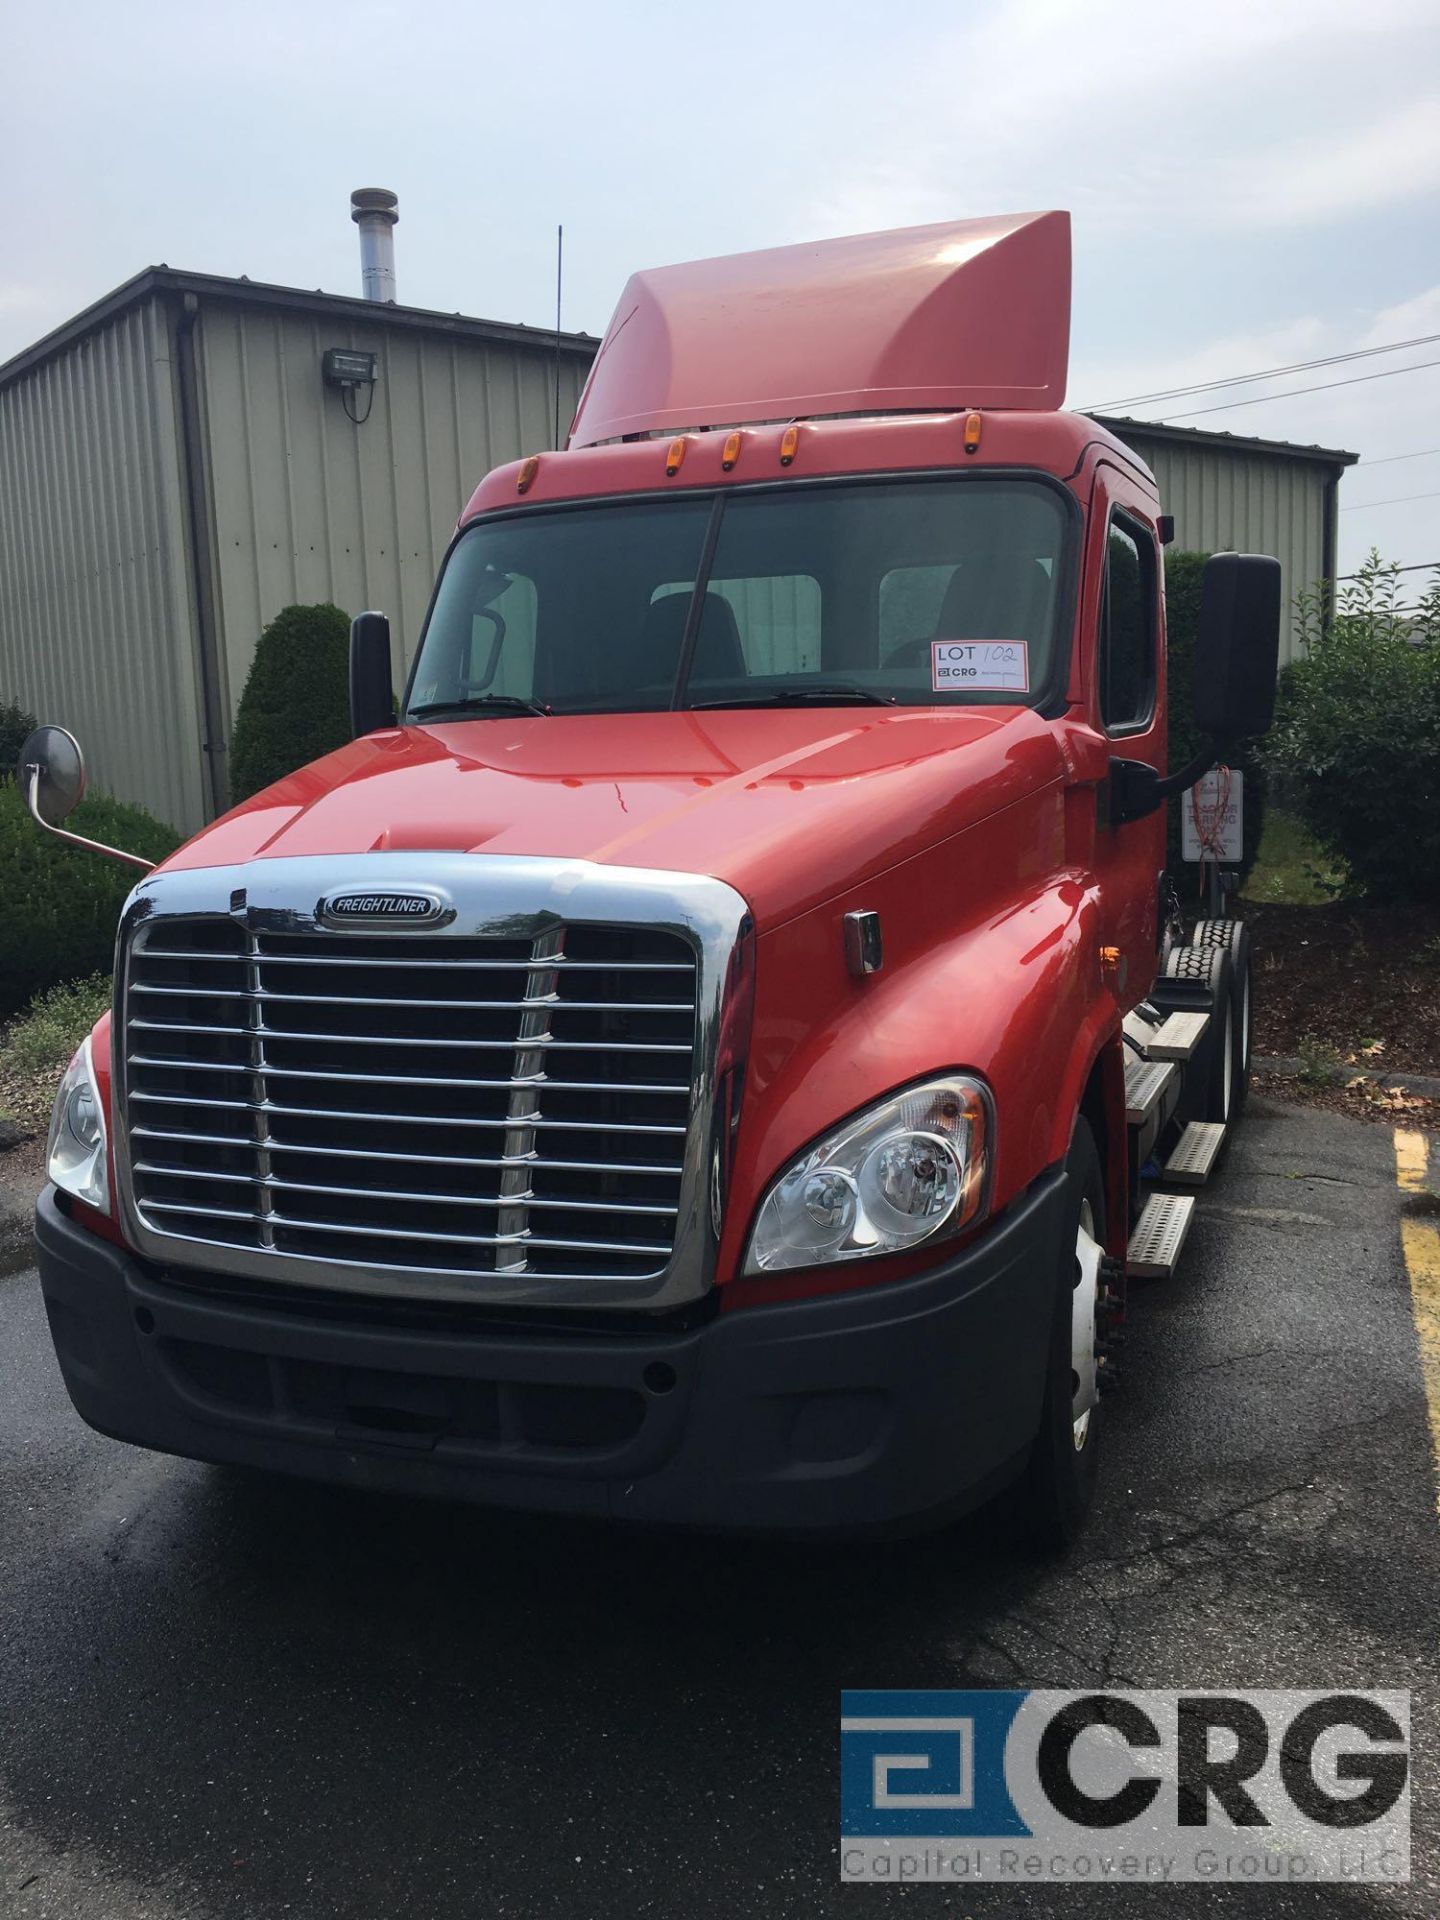 2015 Freightliner Cascadia 125 Tandem Axle Day Cab Tractor, 3AKJGEBG8FDGR2138, 178" wheelbase, - Image 2 of 8